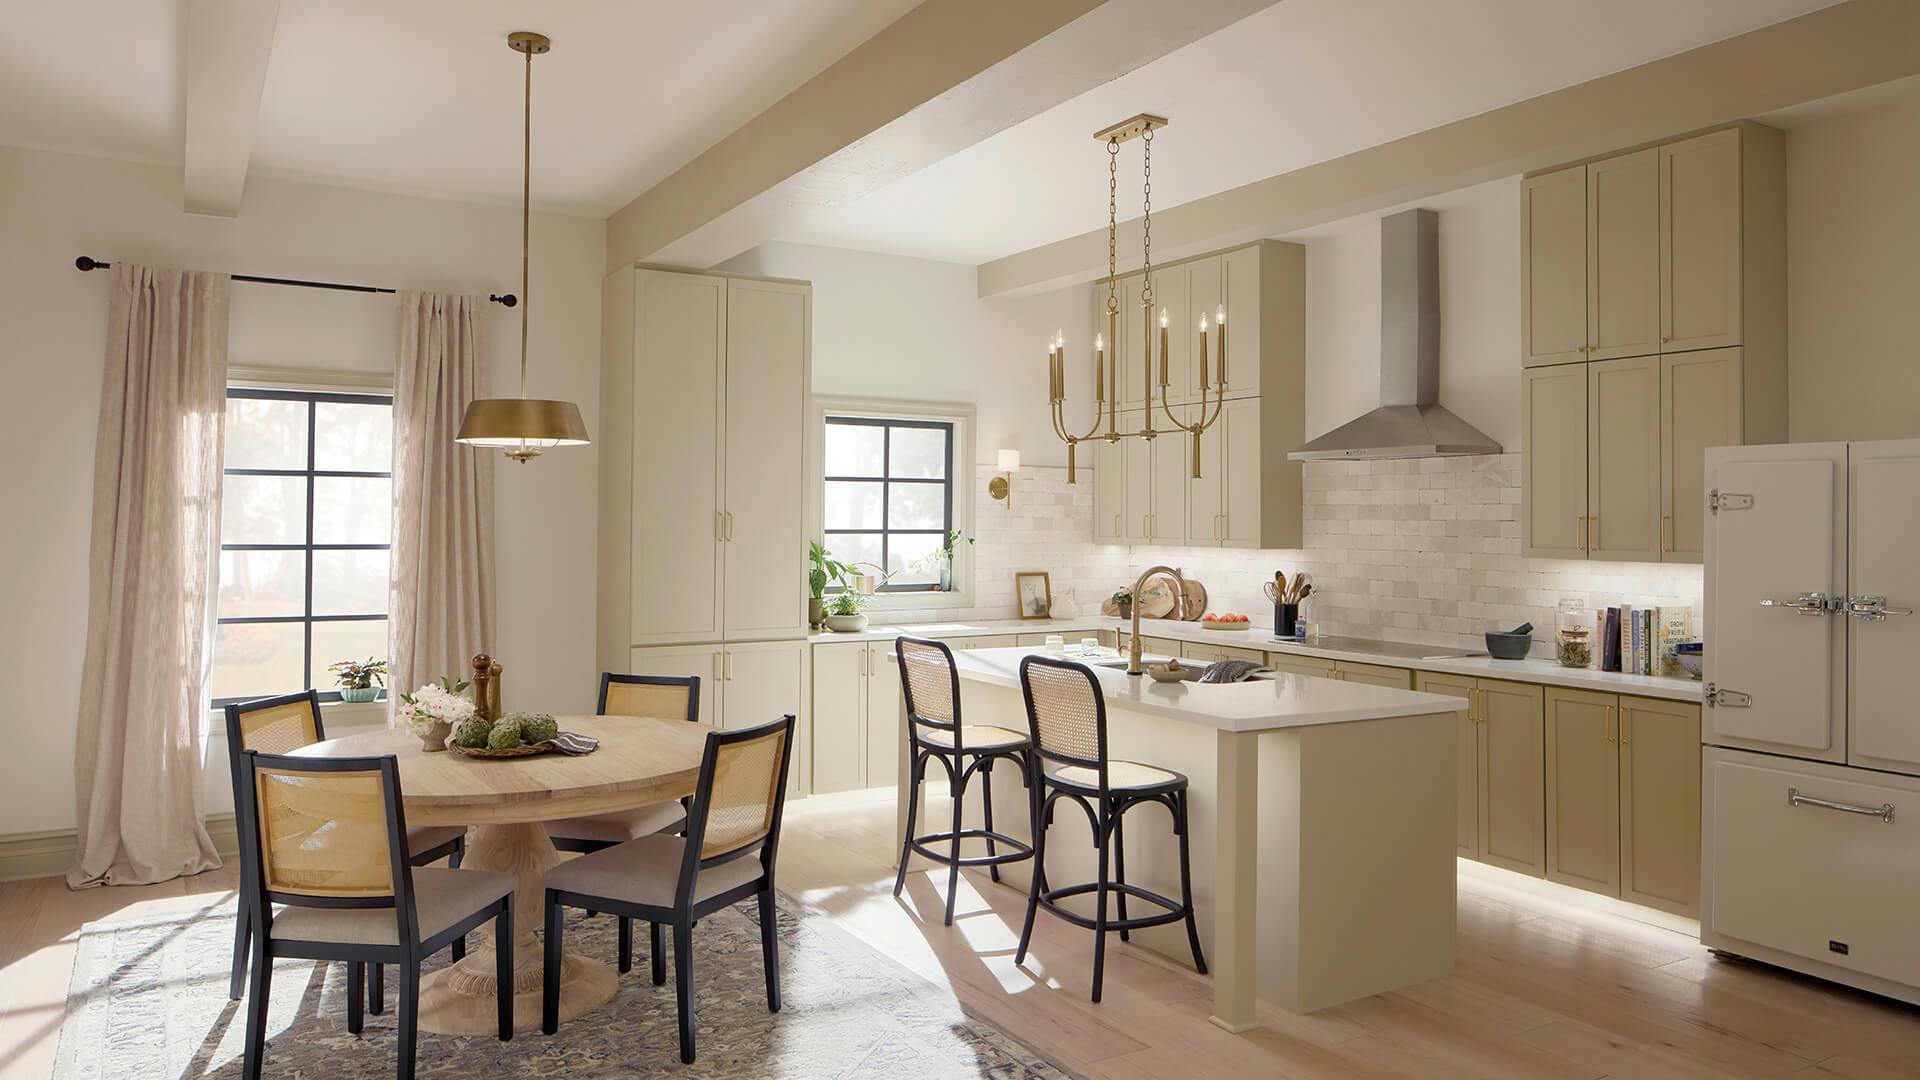 Traditional style kitchen in off white cream shades featuring a Florence pendant lamp